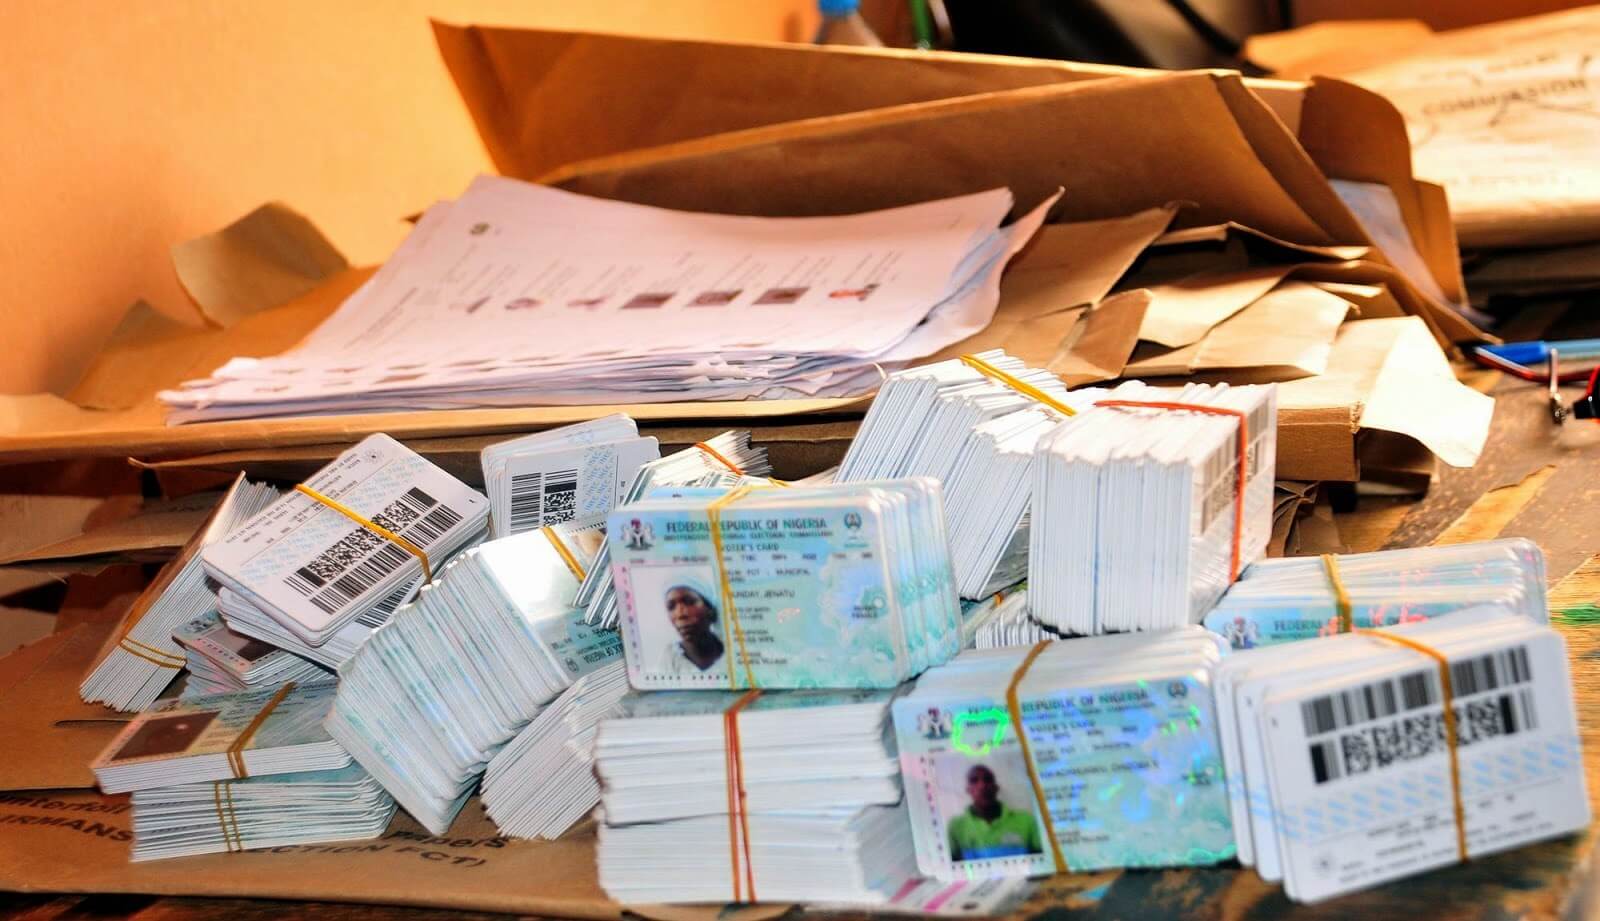 KANO: About 1 Million Voter Cards Awaiting Collection – INEC